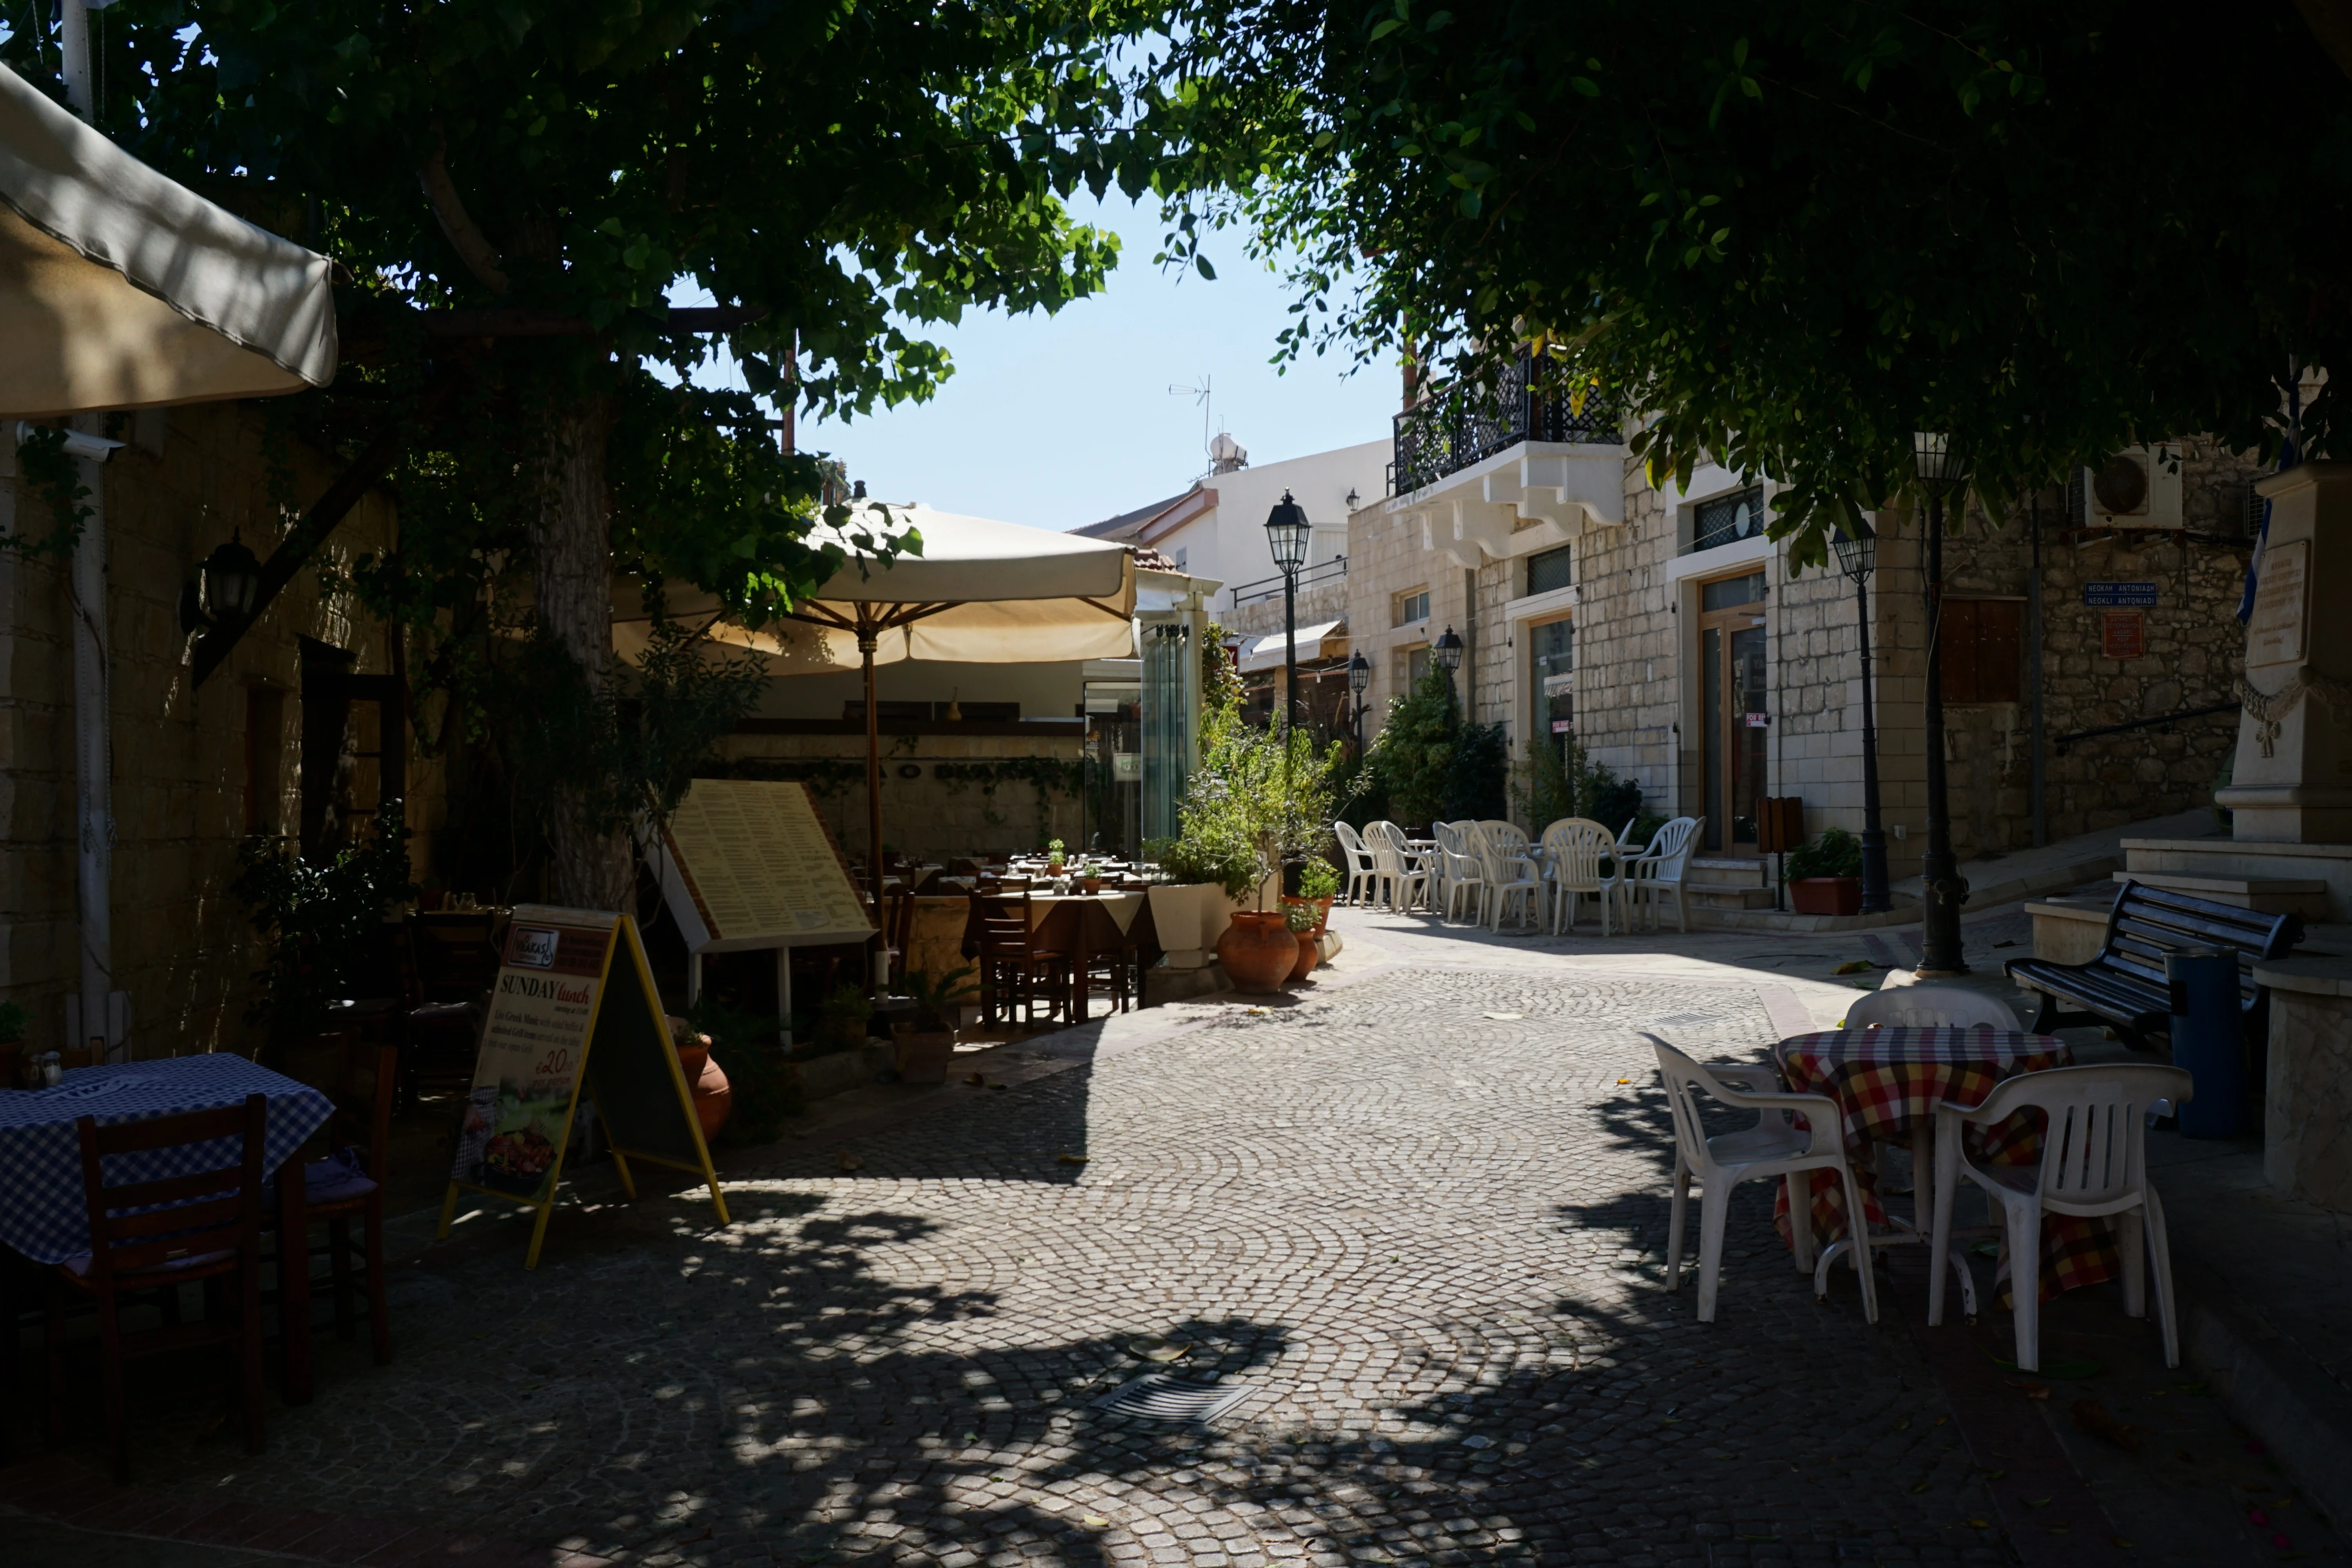 Visiting the small villages in Cyprus is one of the best things to do on the island